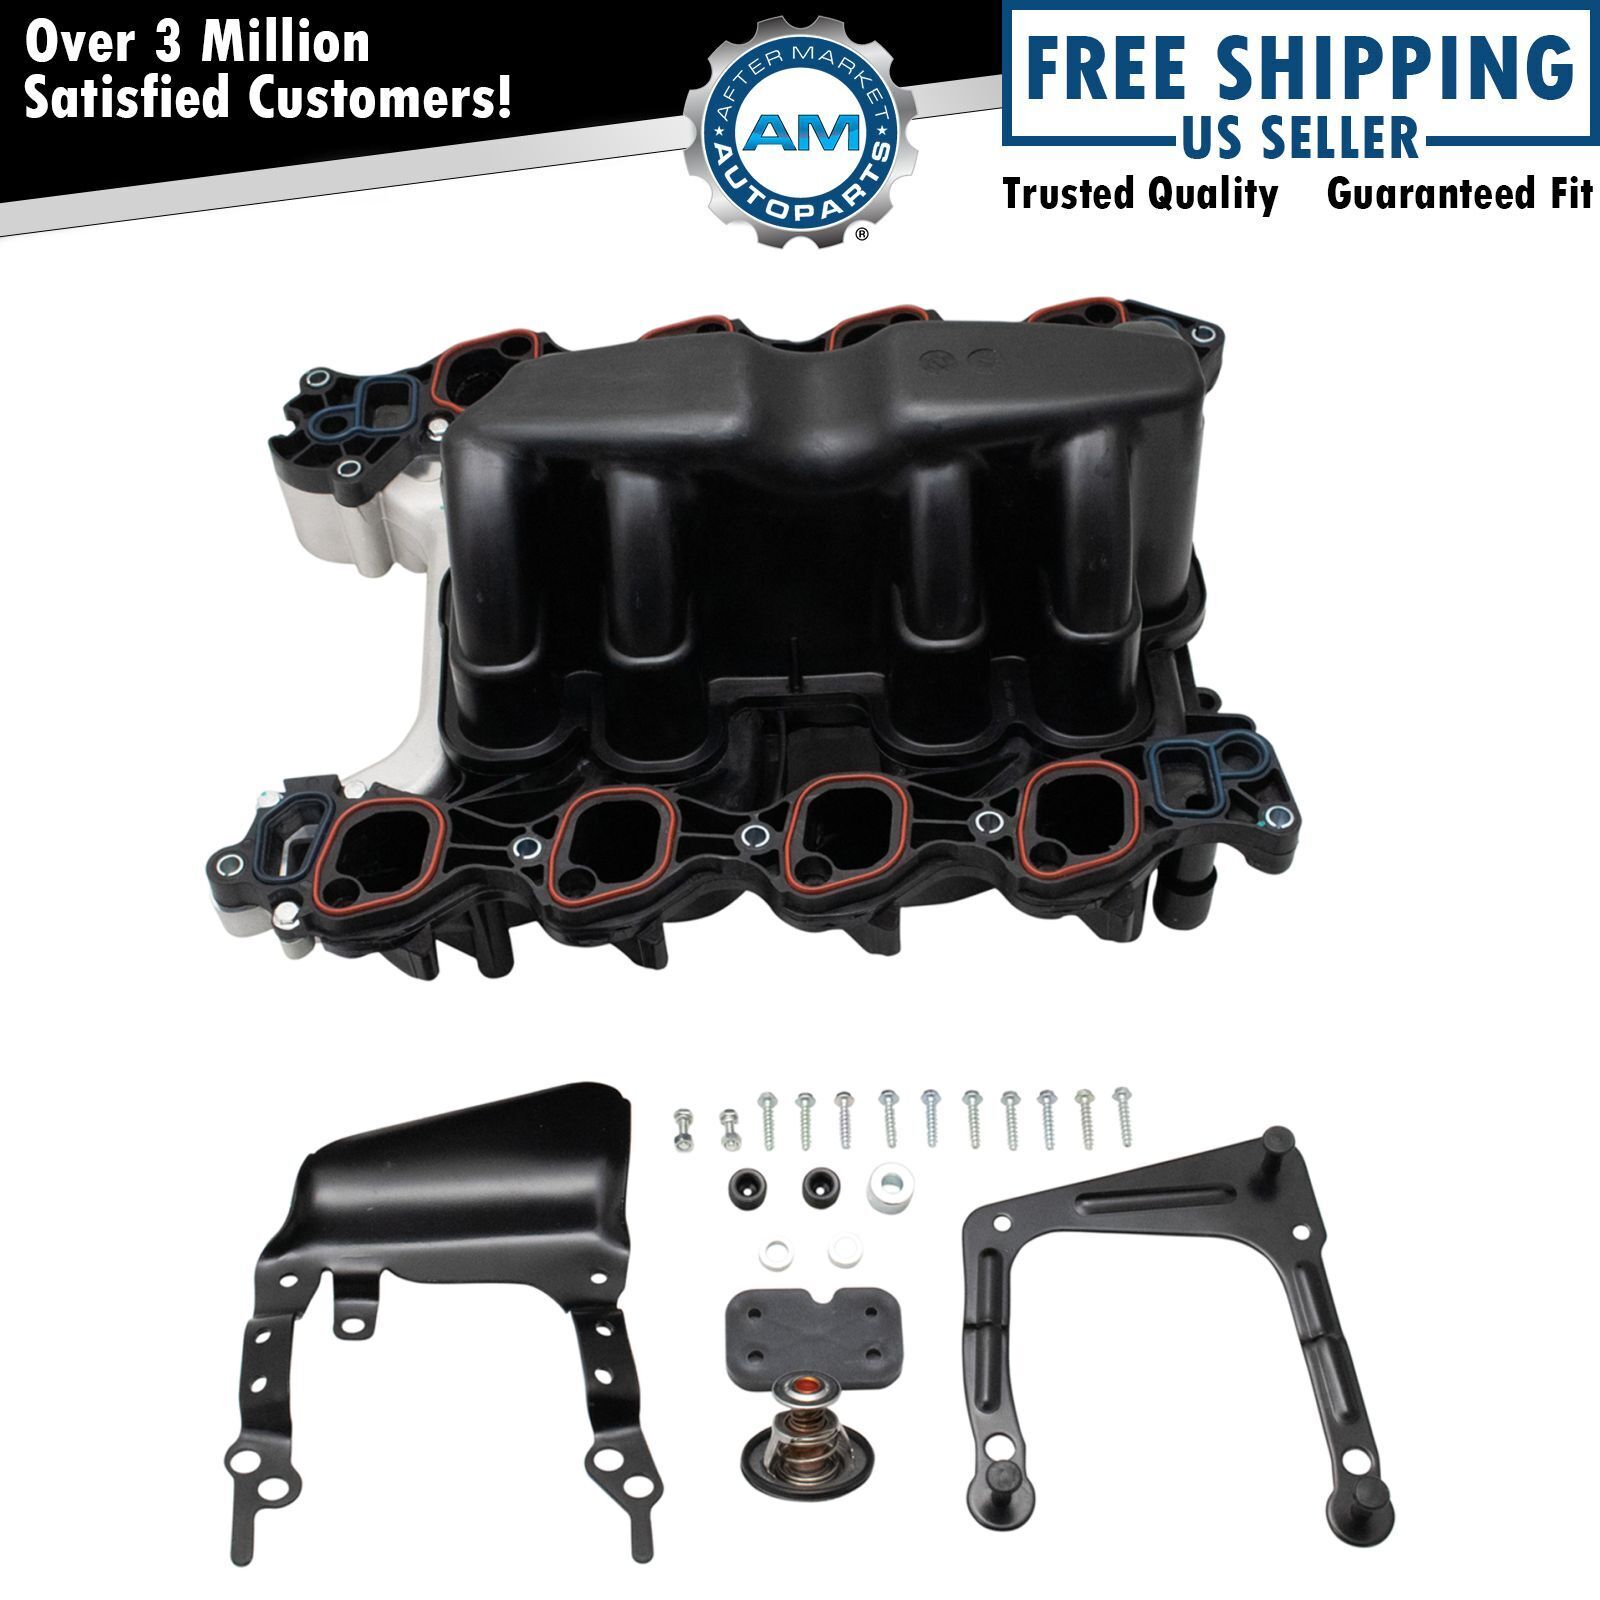 Intake Manifold w/ Thermostat & Gaskets Kit NEW for Ford Lincoln Mercury 4.6L V8